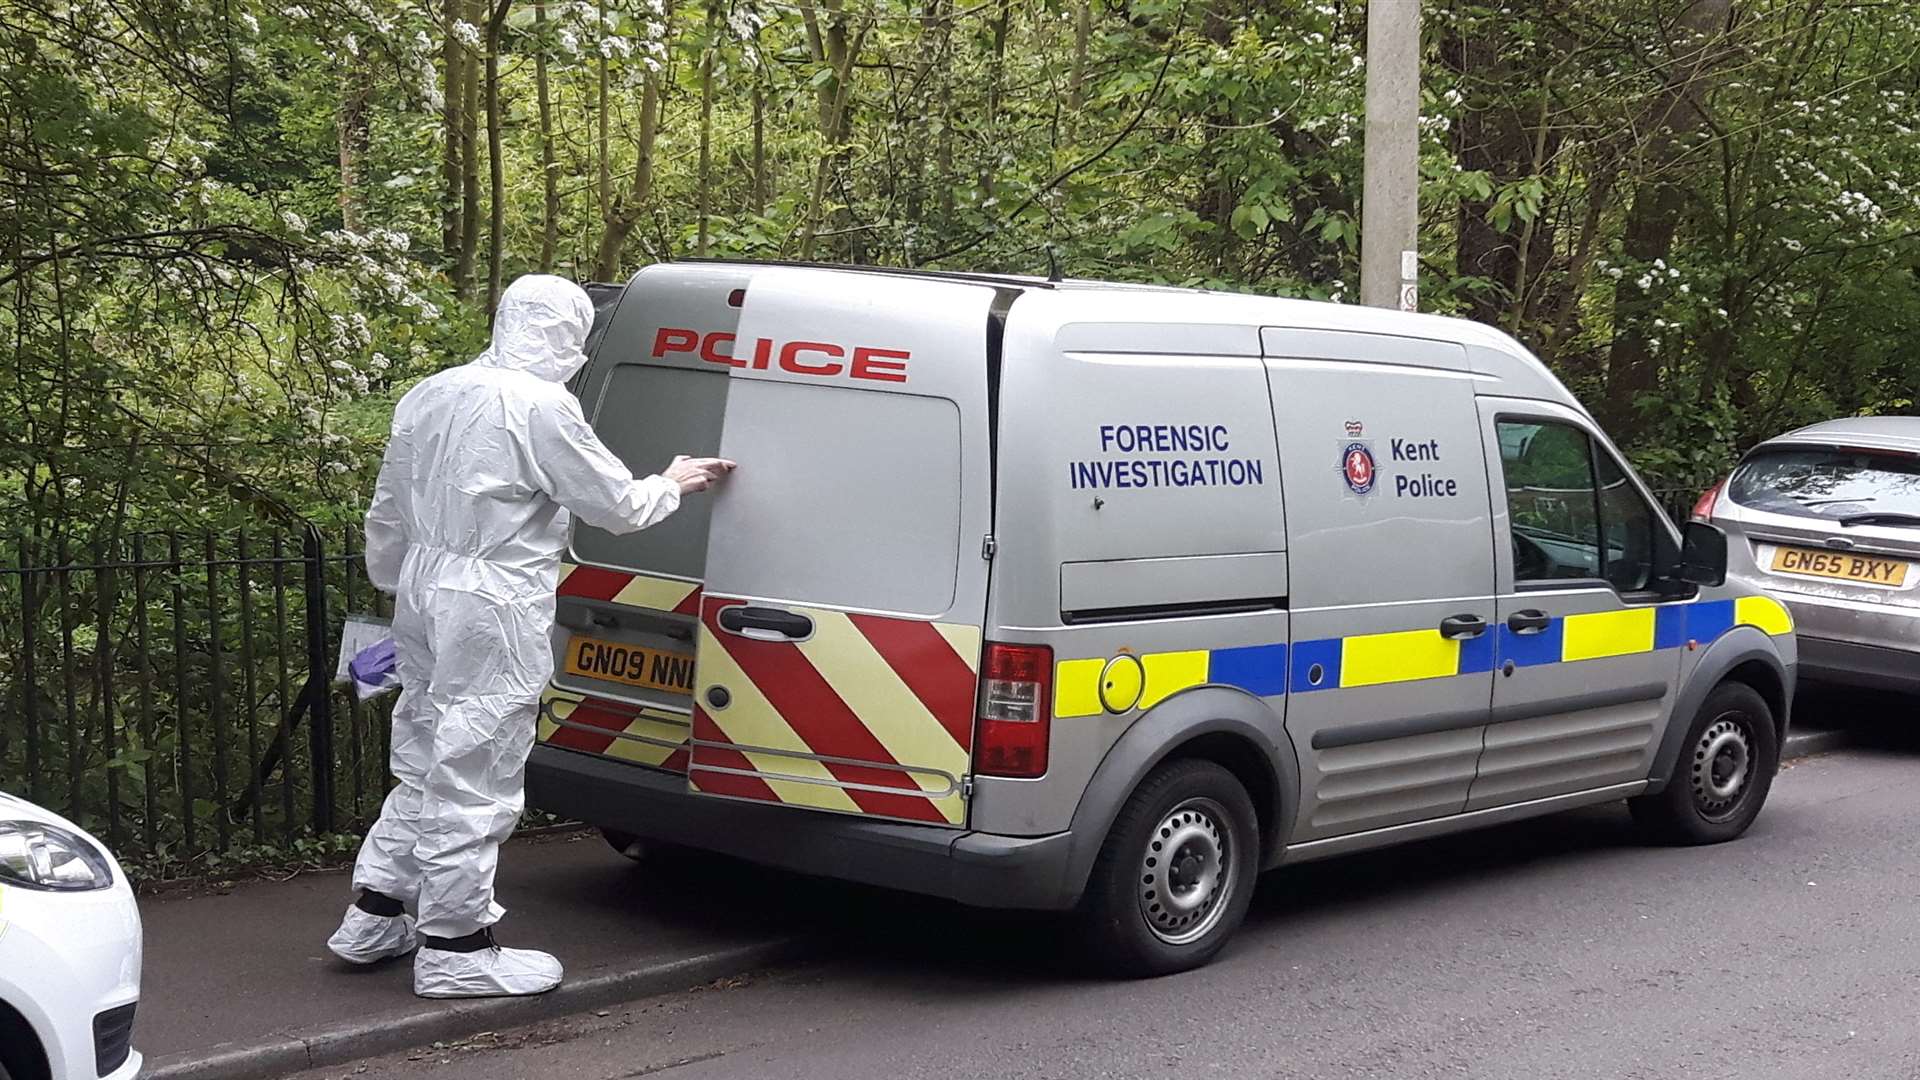 Mr Sirbu's body was found in the woods near Crisbrook Meadow